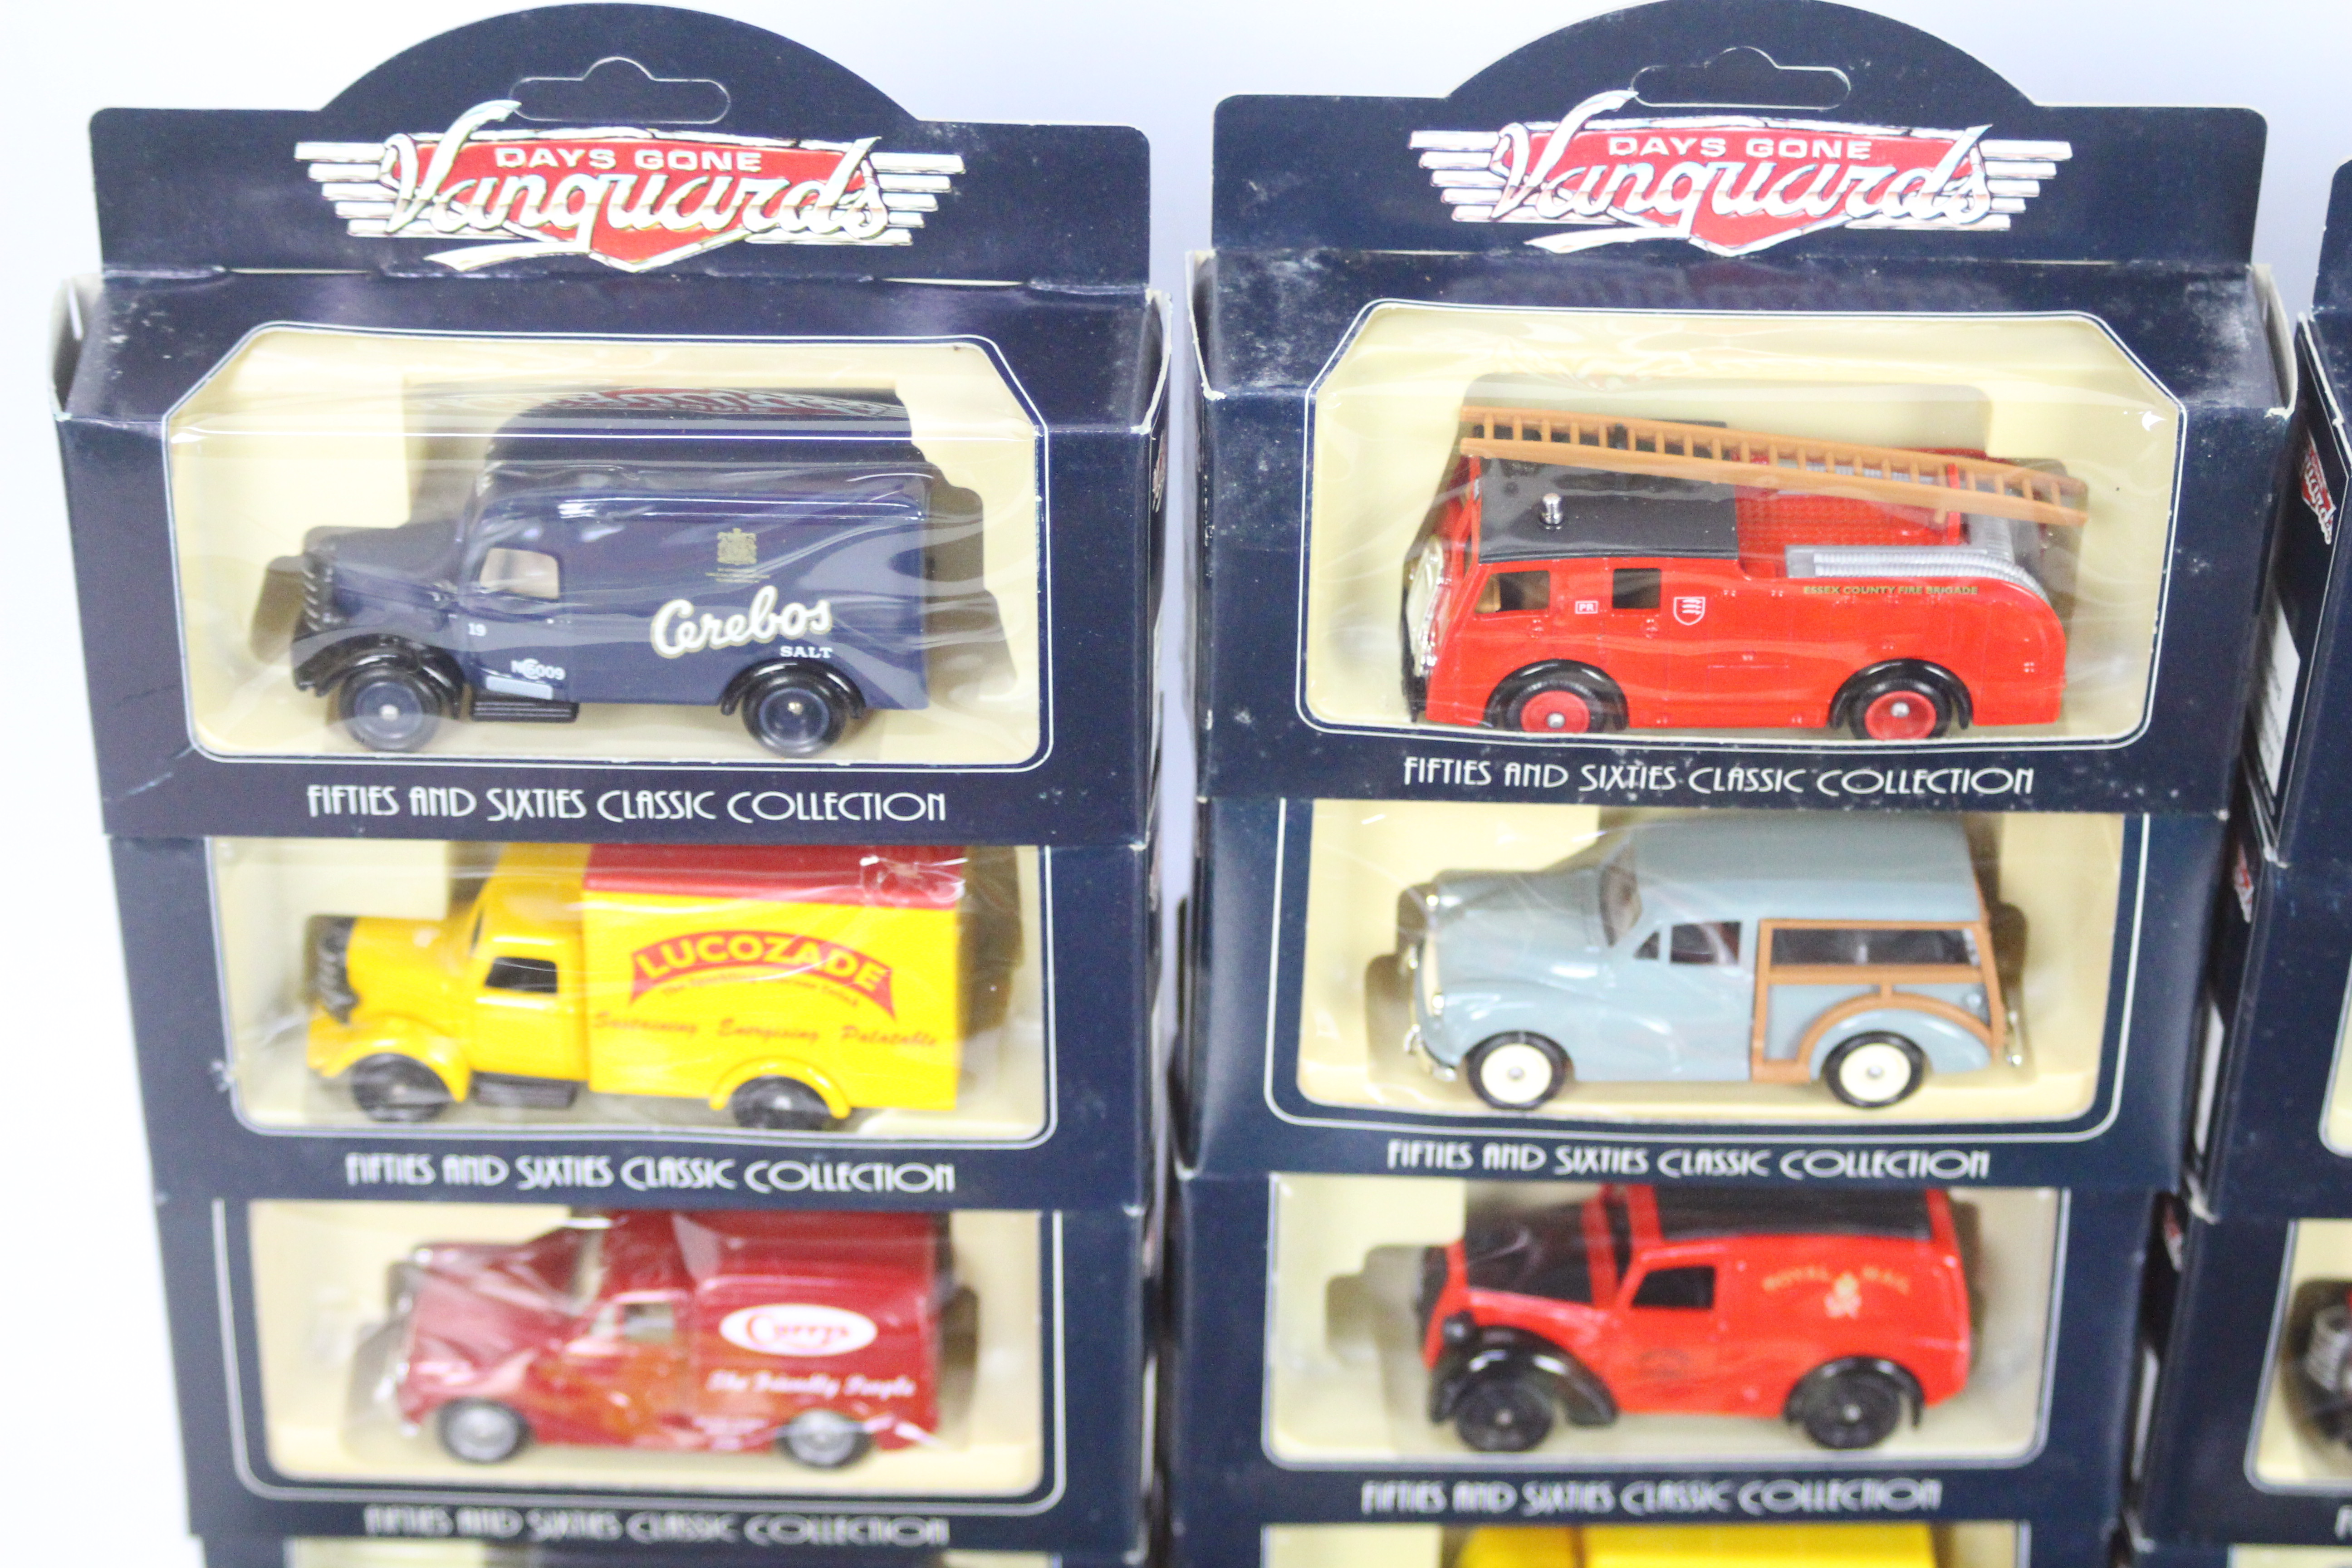 Lledo - Vanguards - Days Gone - A collection of 35 die cast models in excellent condition and boxed. - Image 2 of 2